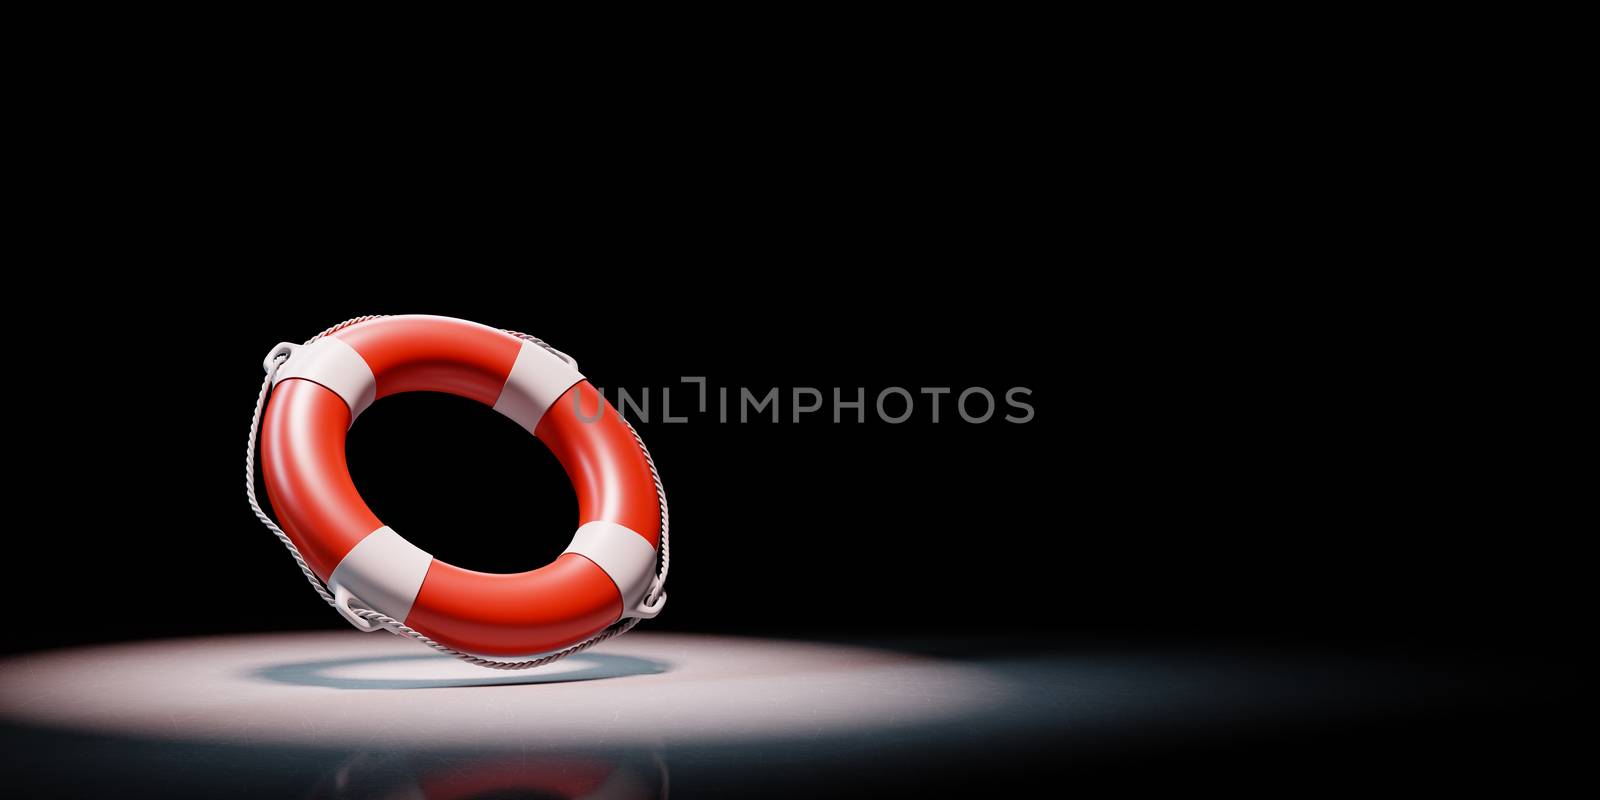 Red and White Lifebelt Spotlighted on Black Background with Copy Space 3D Illustration